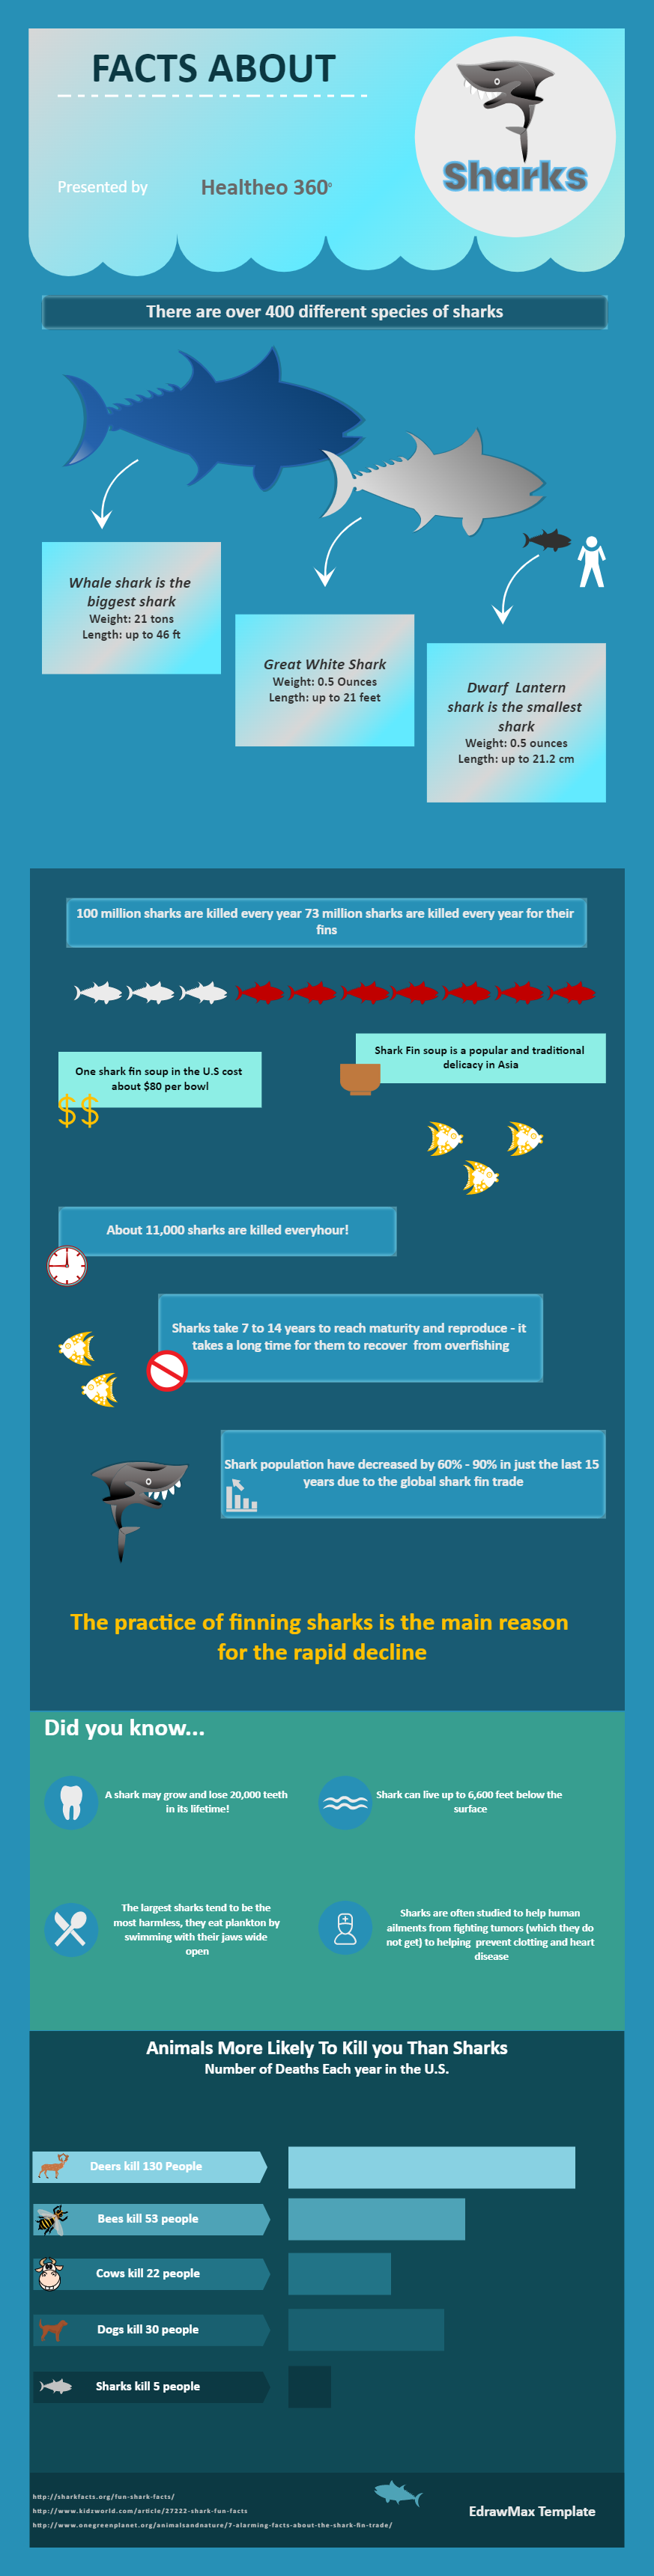 Facts About Shark Infographic